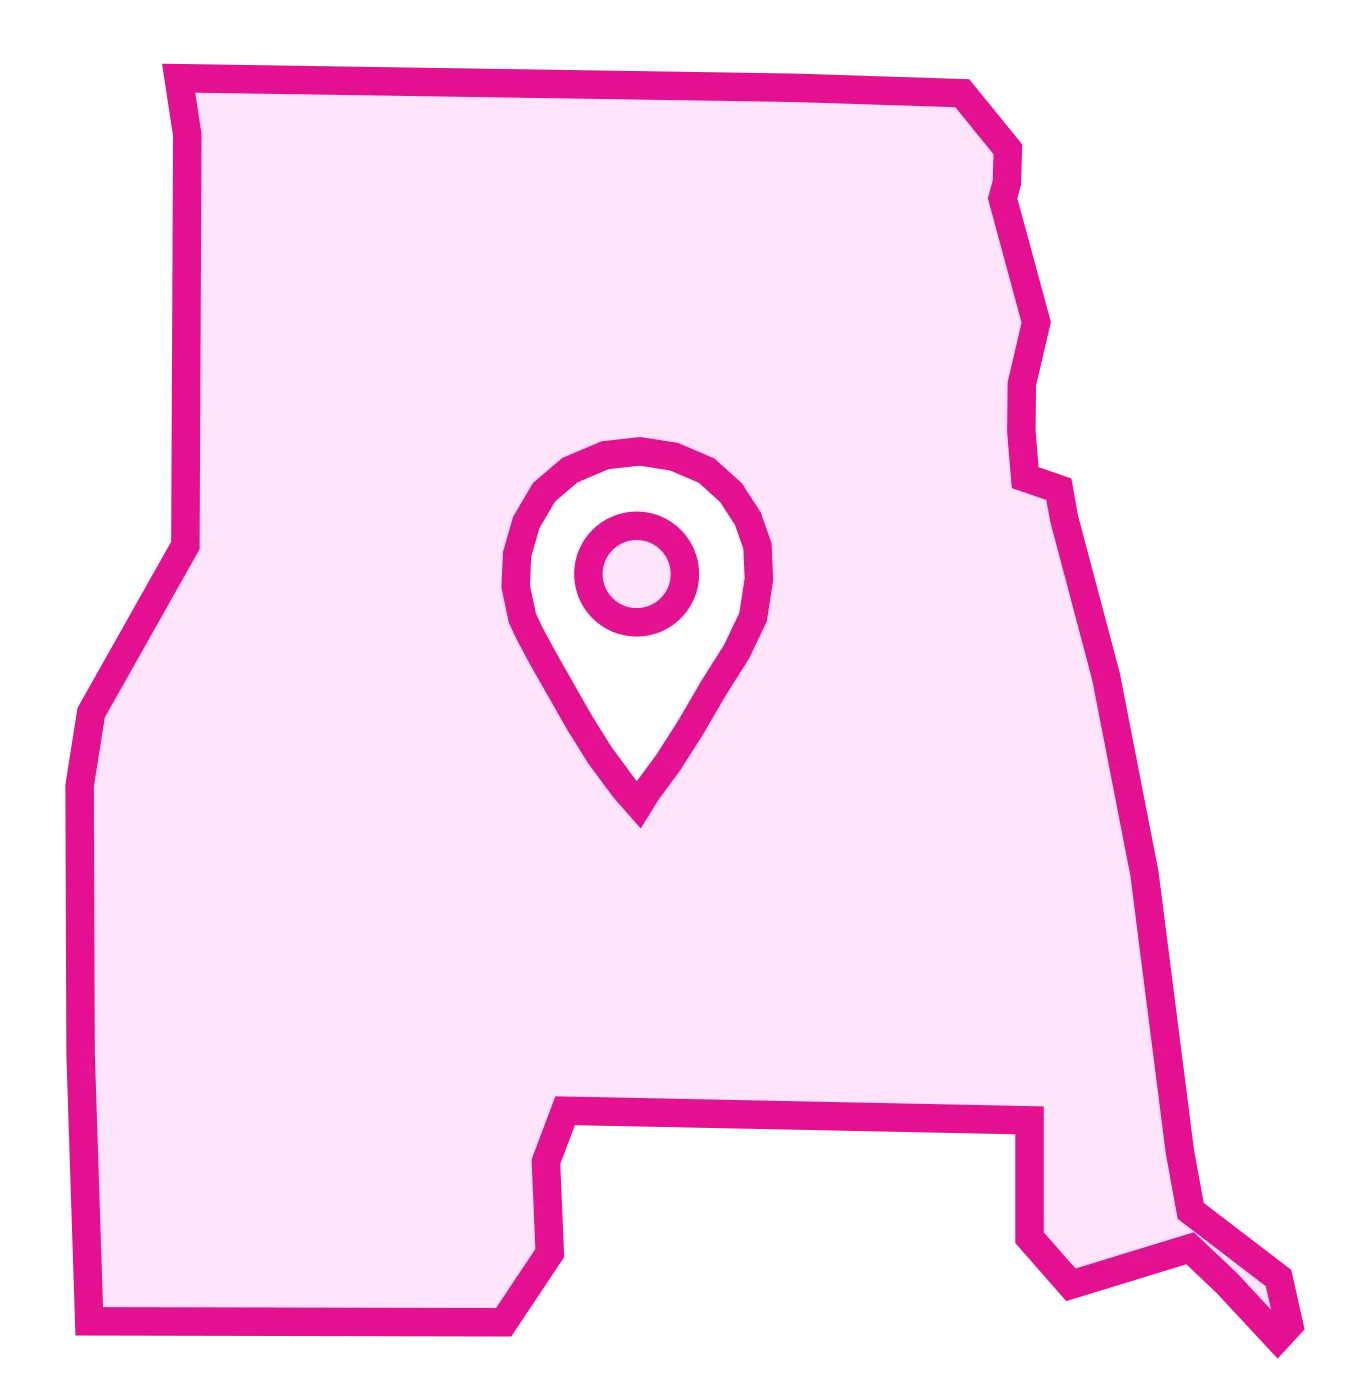 North Seattle pink map